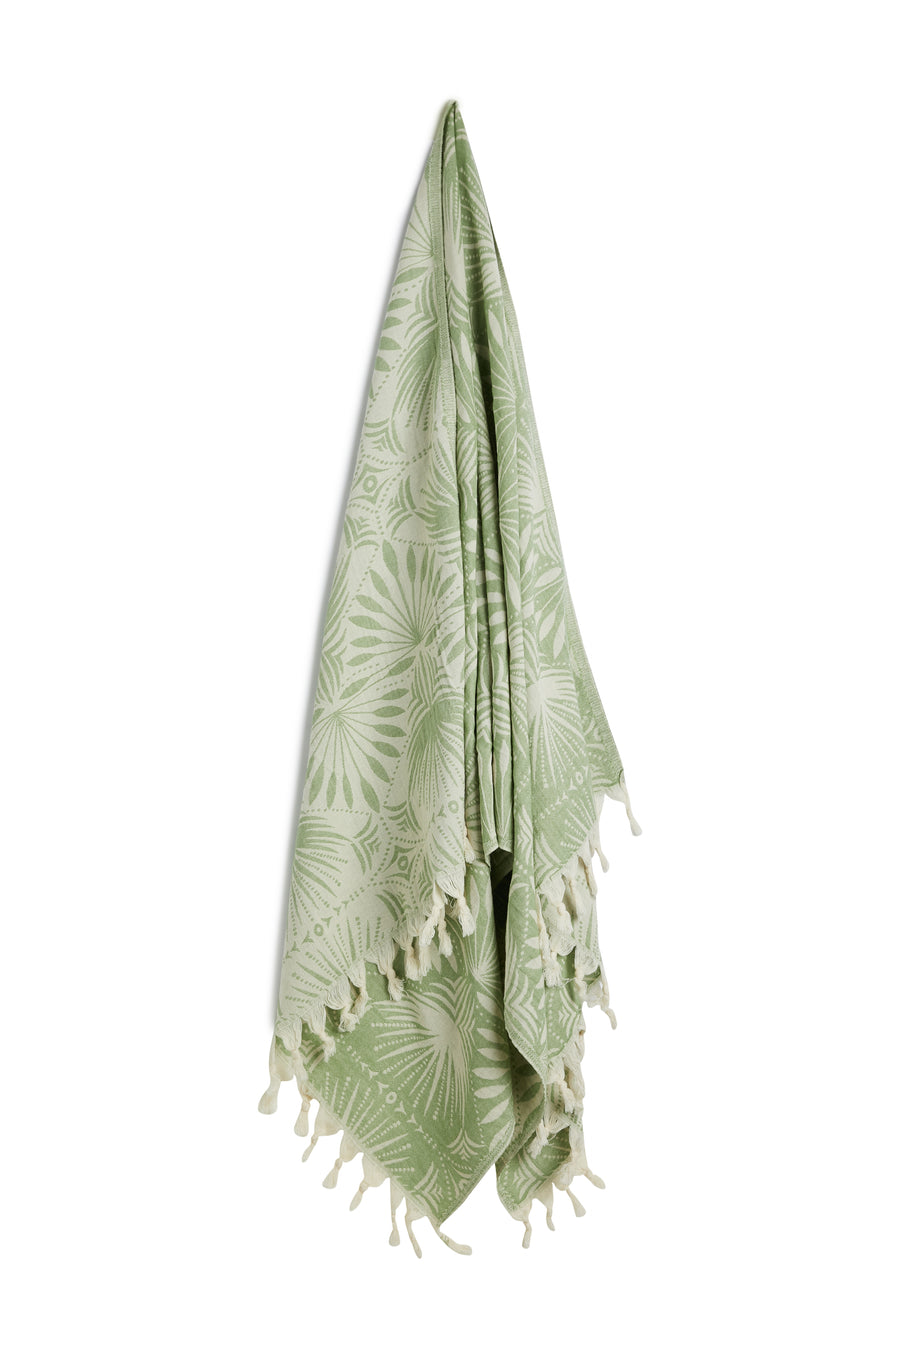 salty shadows - turkish towel palm frond - olive